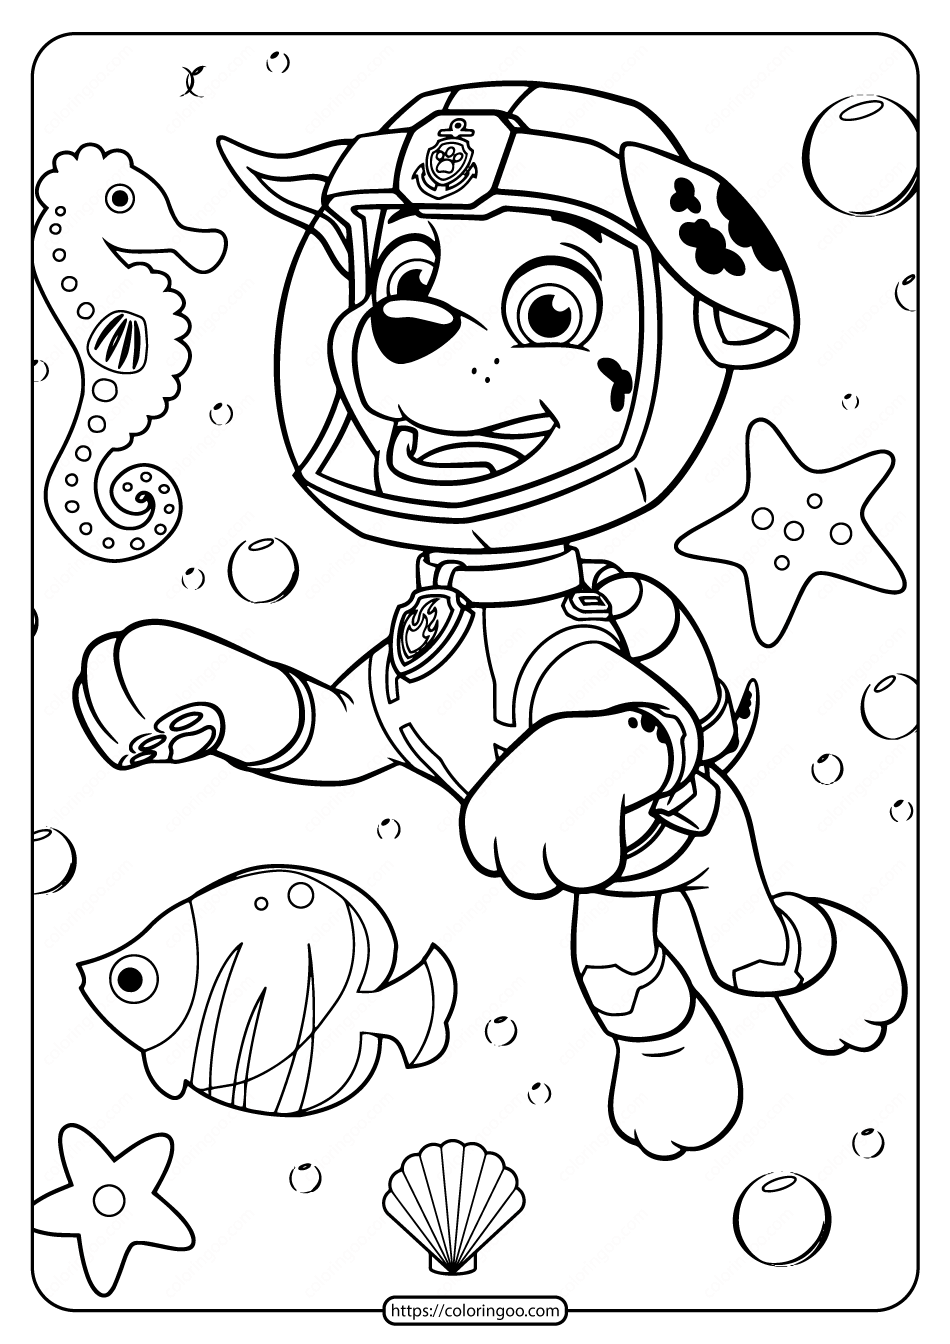 Paw Patrol Coloring Pages FREE Printable 75